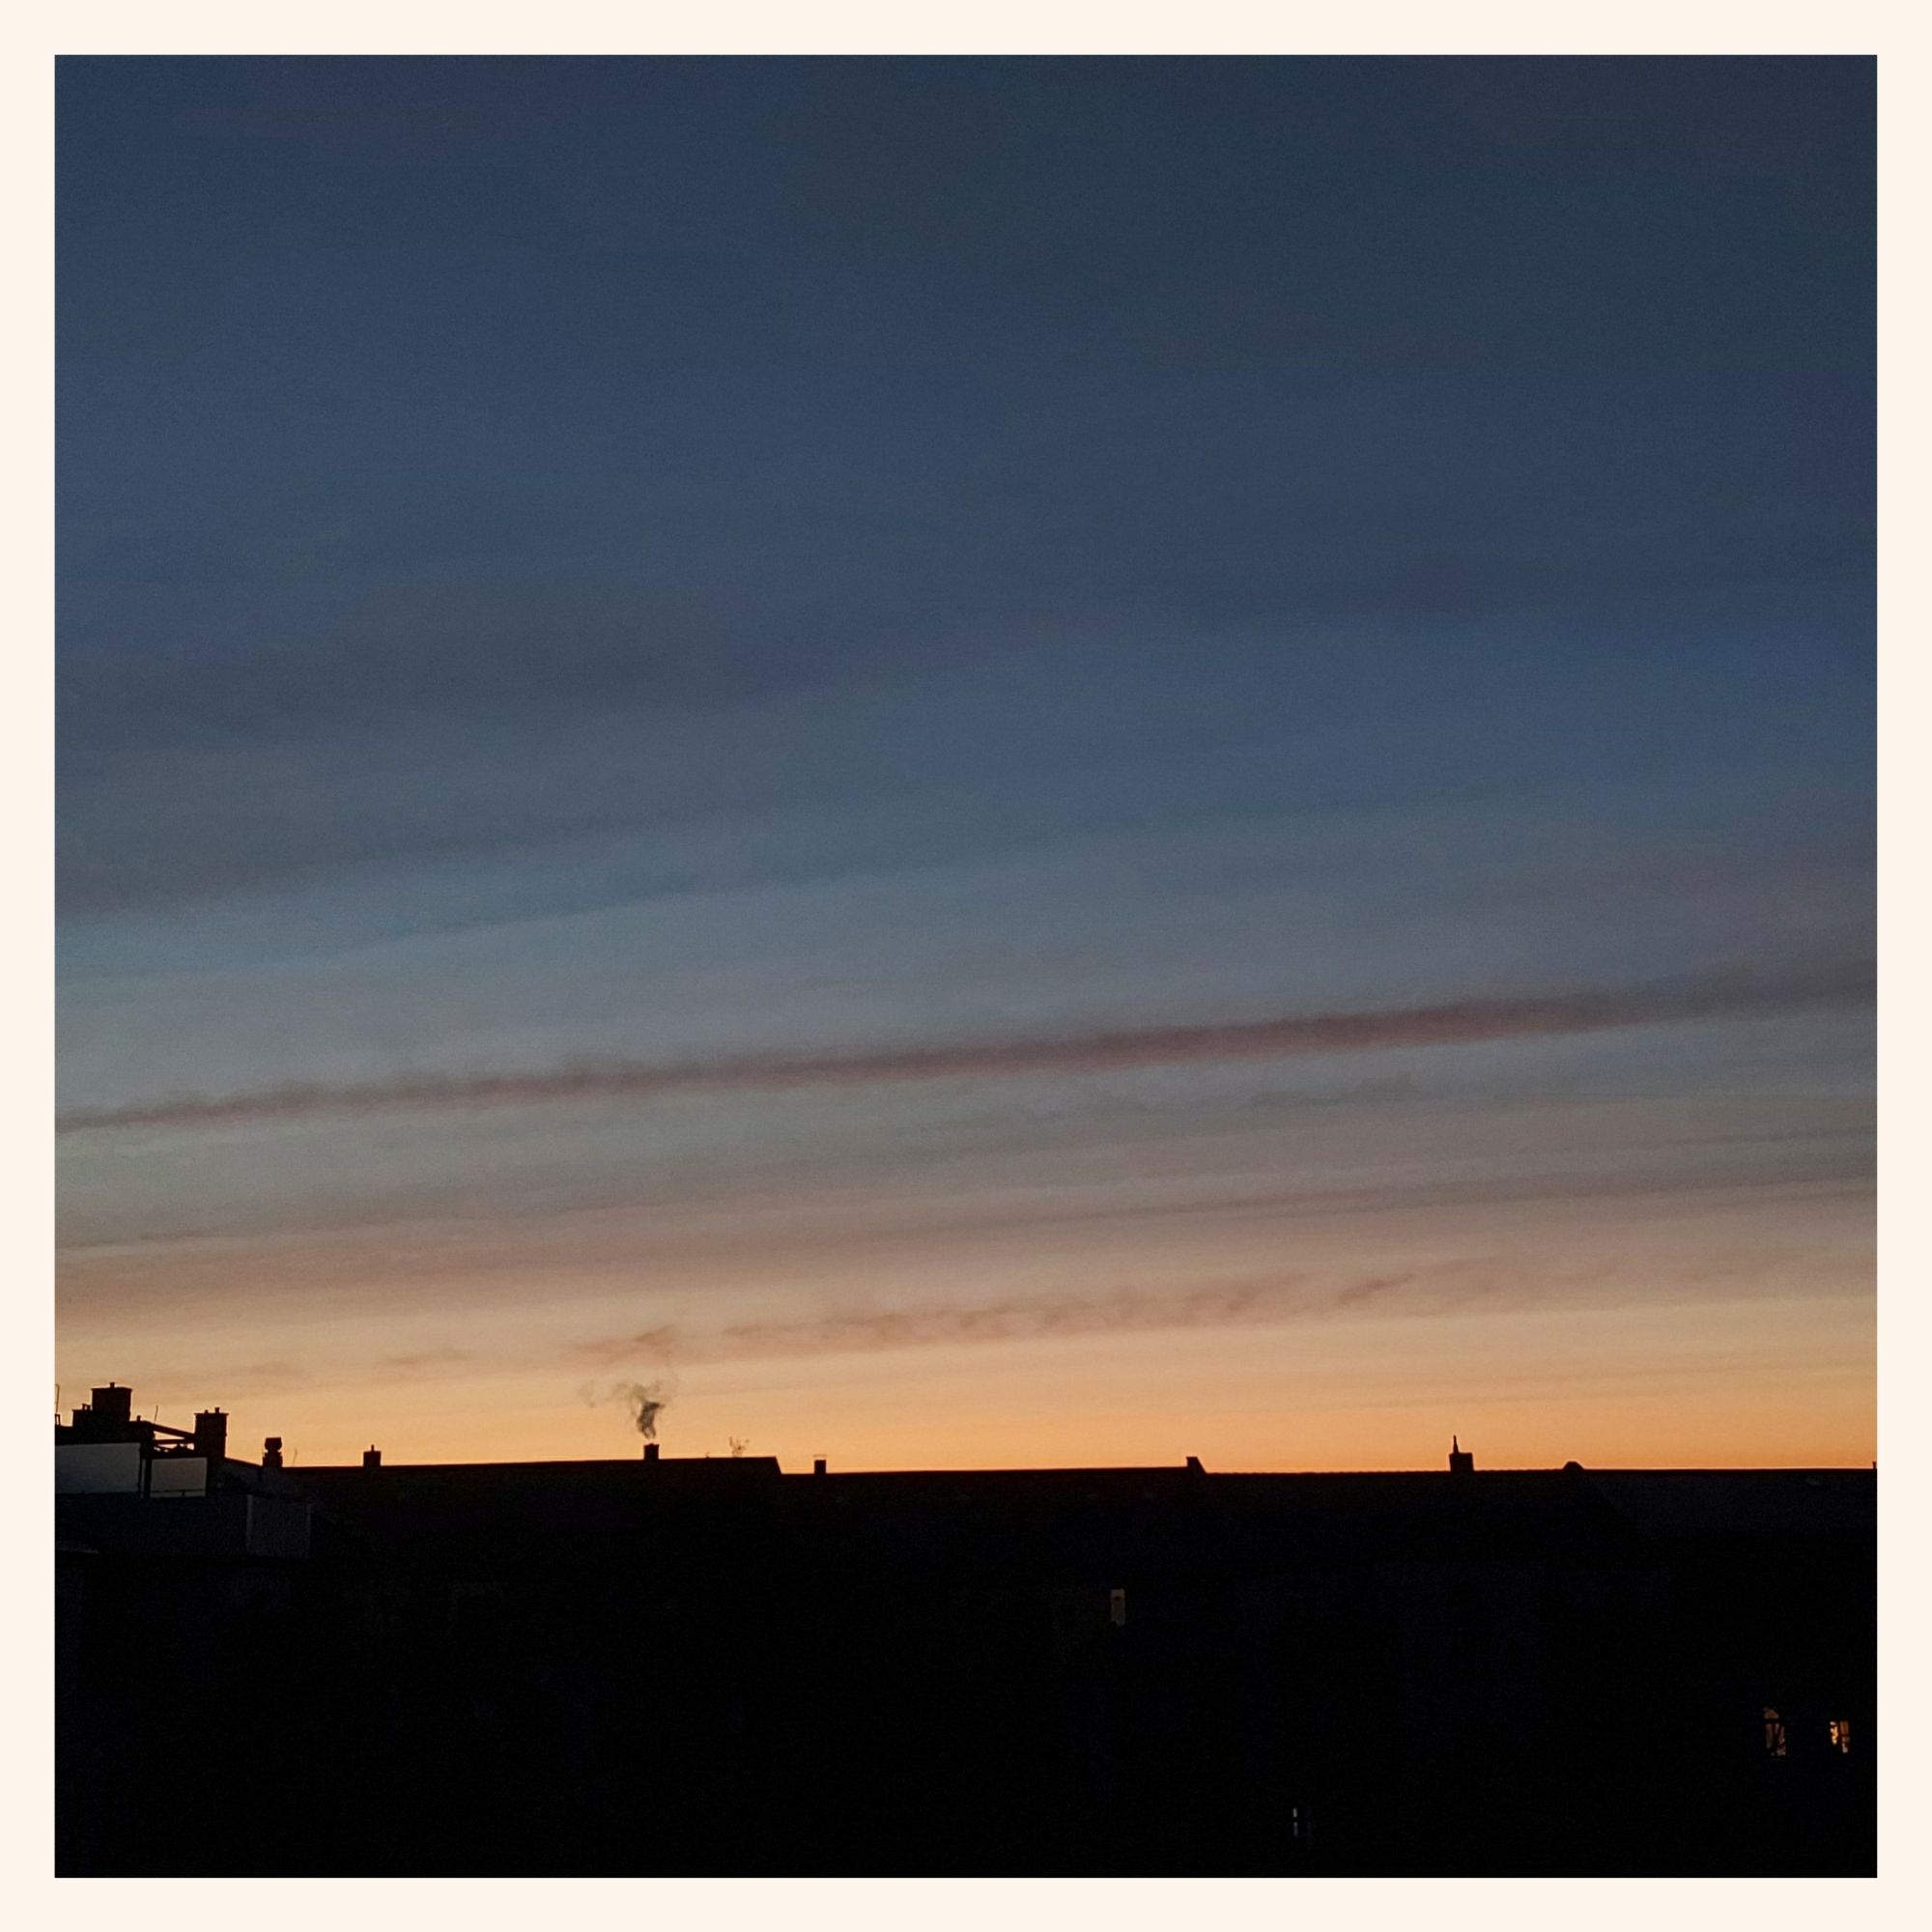 Early morning sky, before sunrise. Quiet colours, thin lines of clouds. Houses and chimneys below.